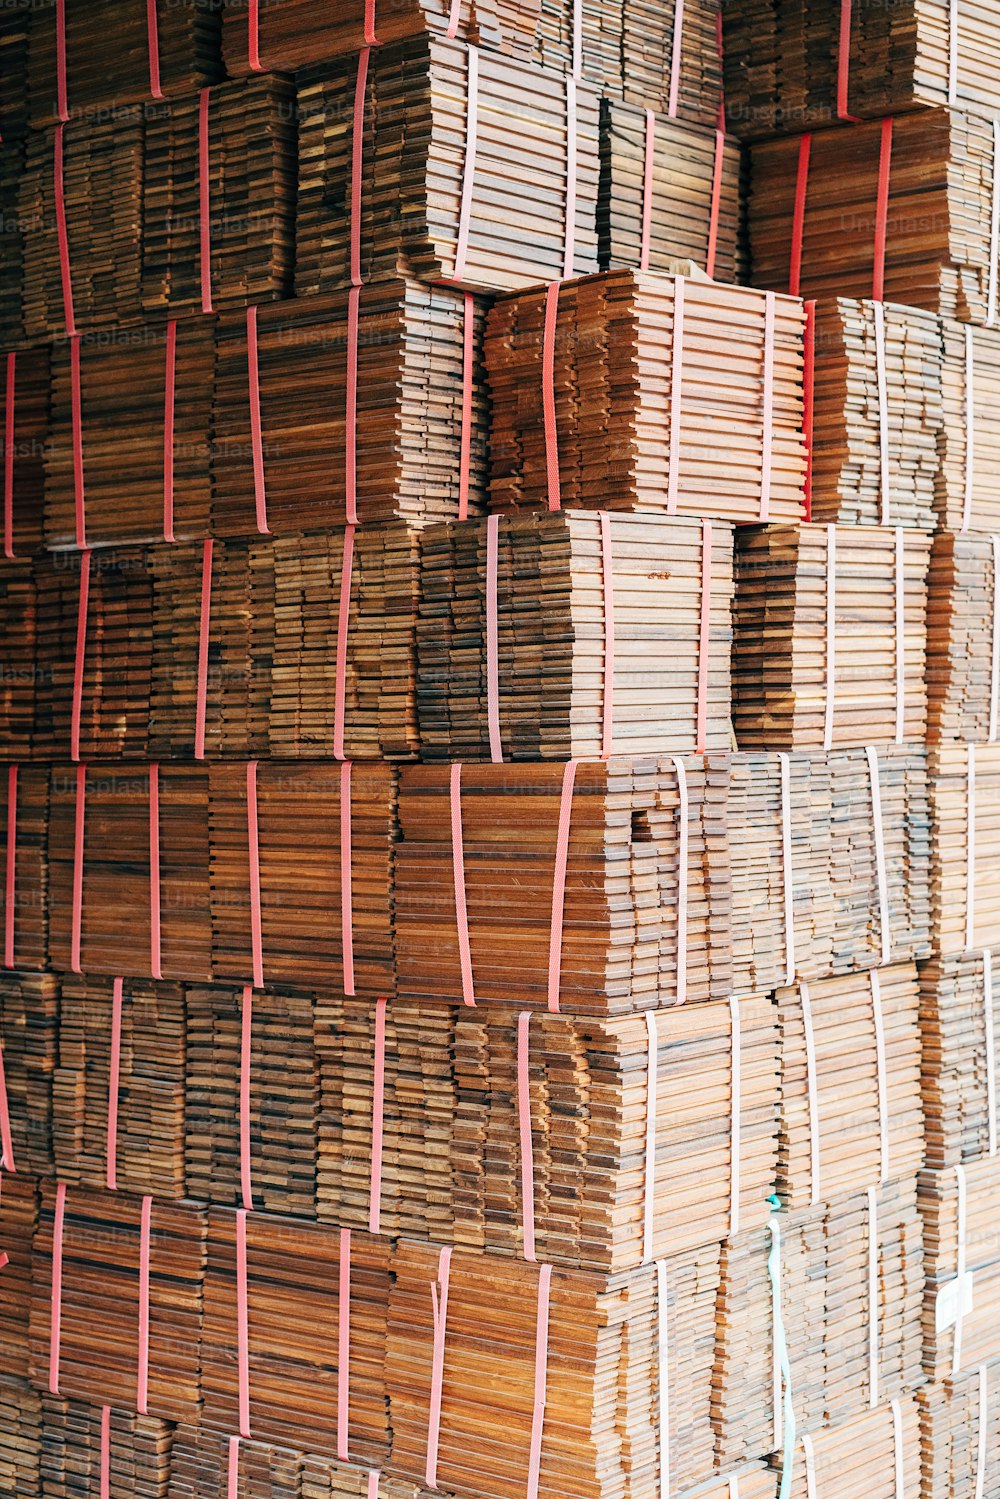 stacks of wooden boards stacked on top of each other